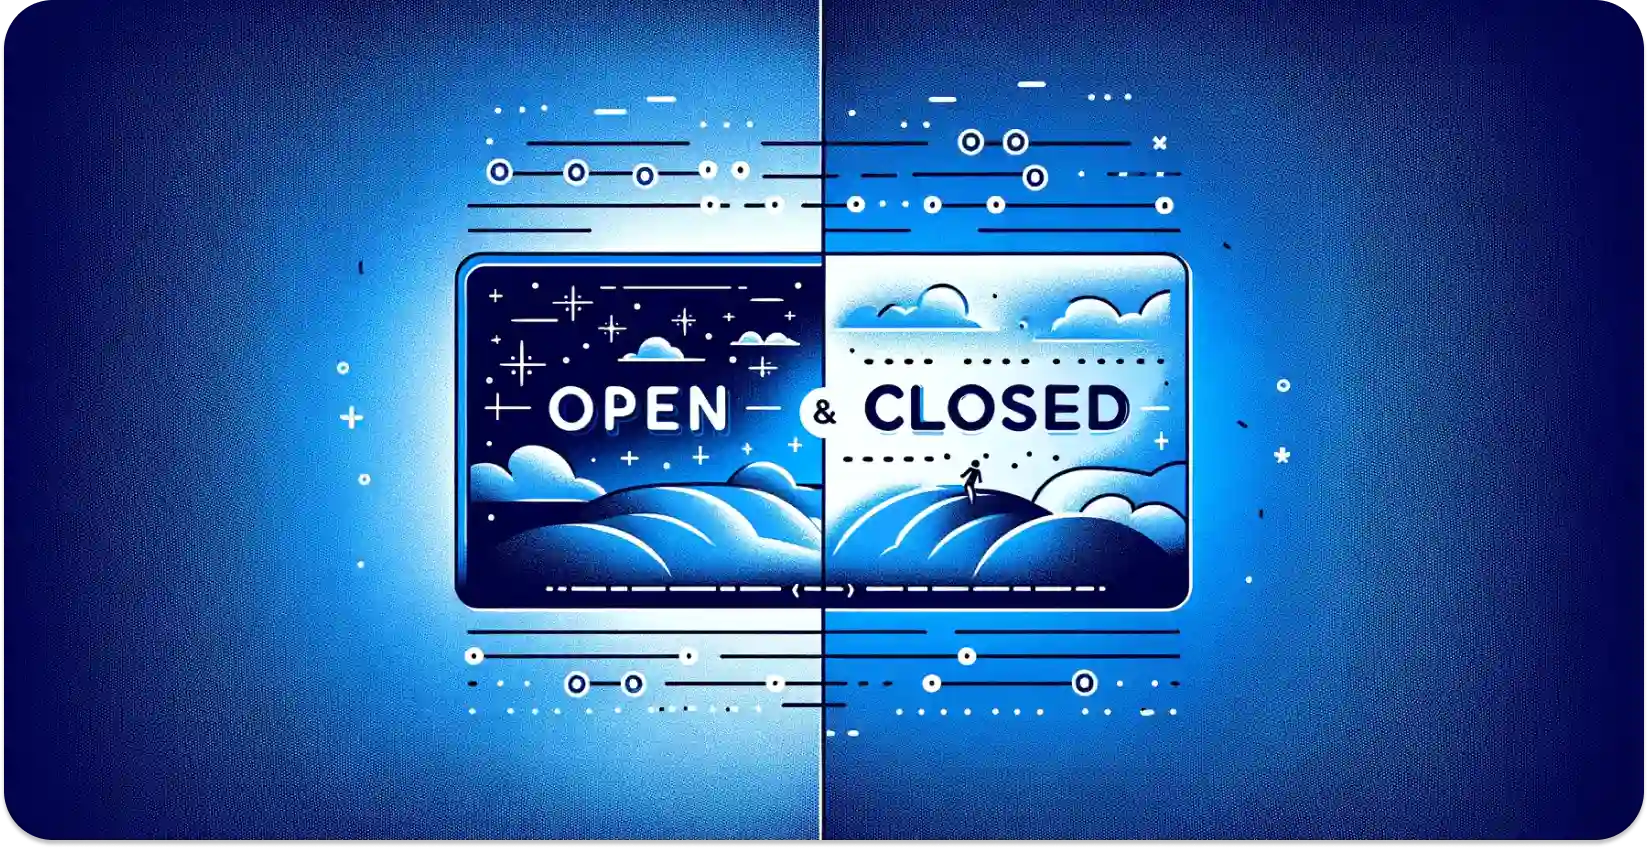 Stylized artwork of open and closed signs, representing the different types of subtitles.